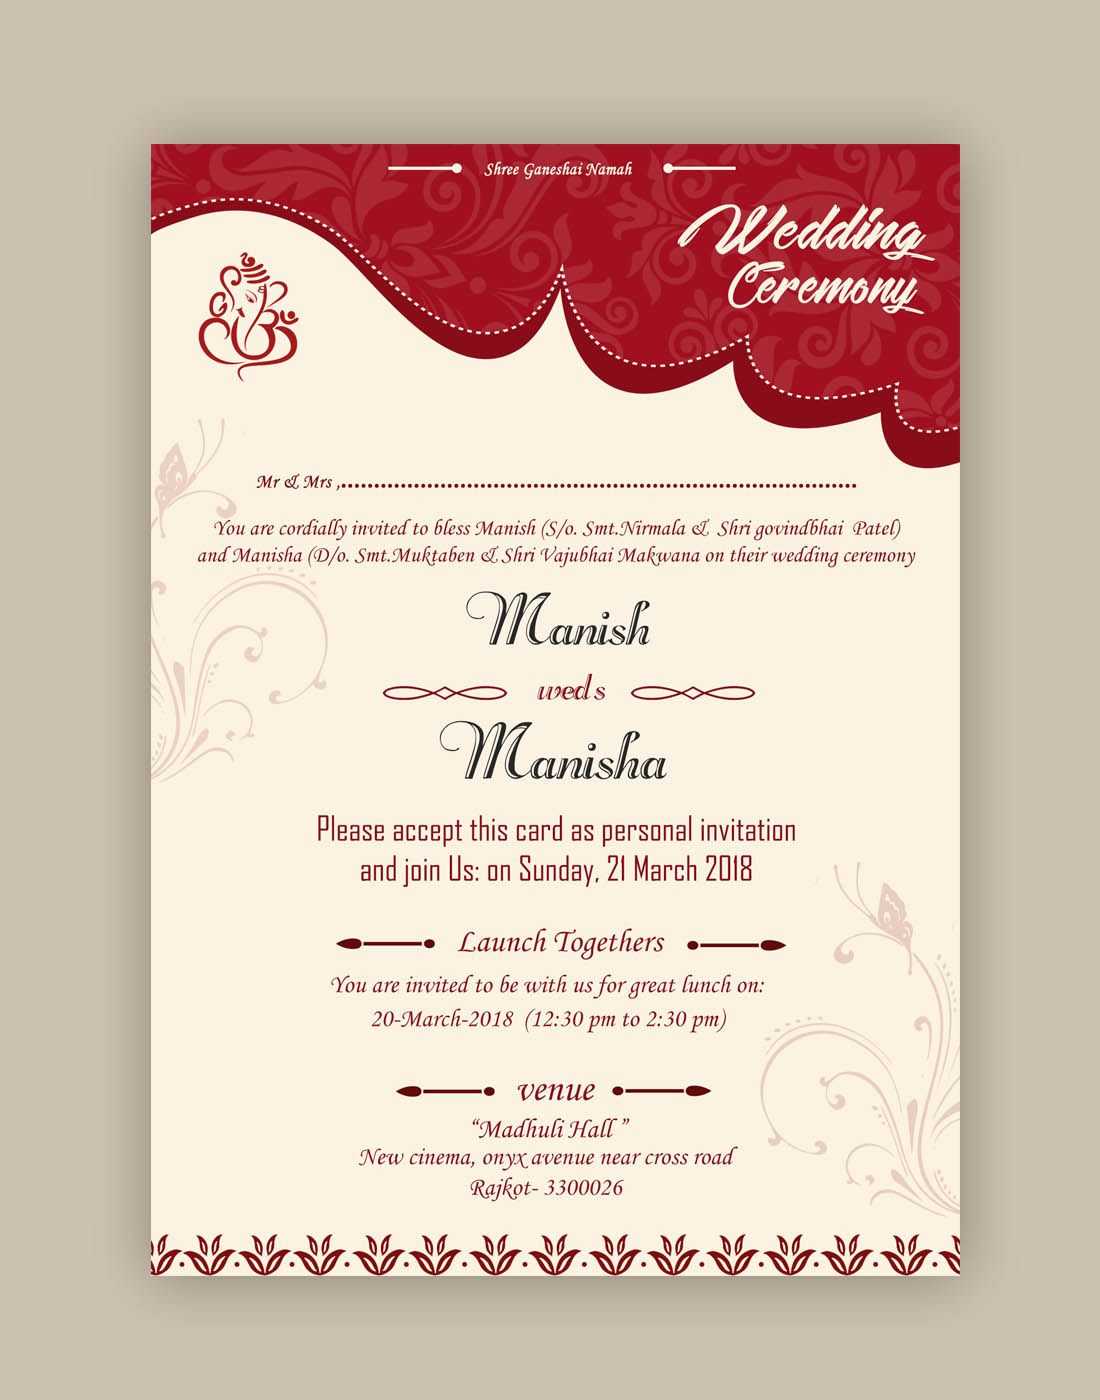 Free Wedding Card Psd Templates In 2019 | Free Wedding Cards With Indian Wedding Cards Design Templates